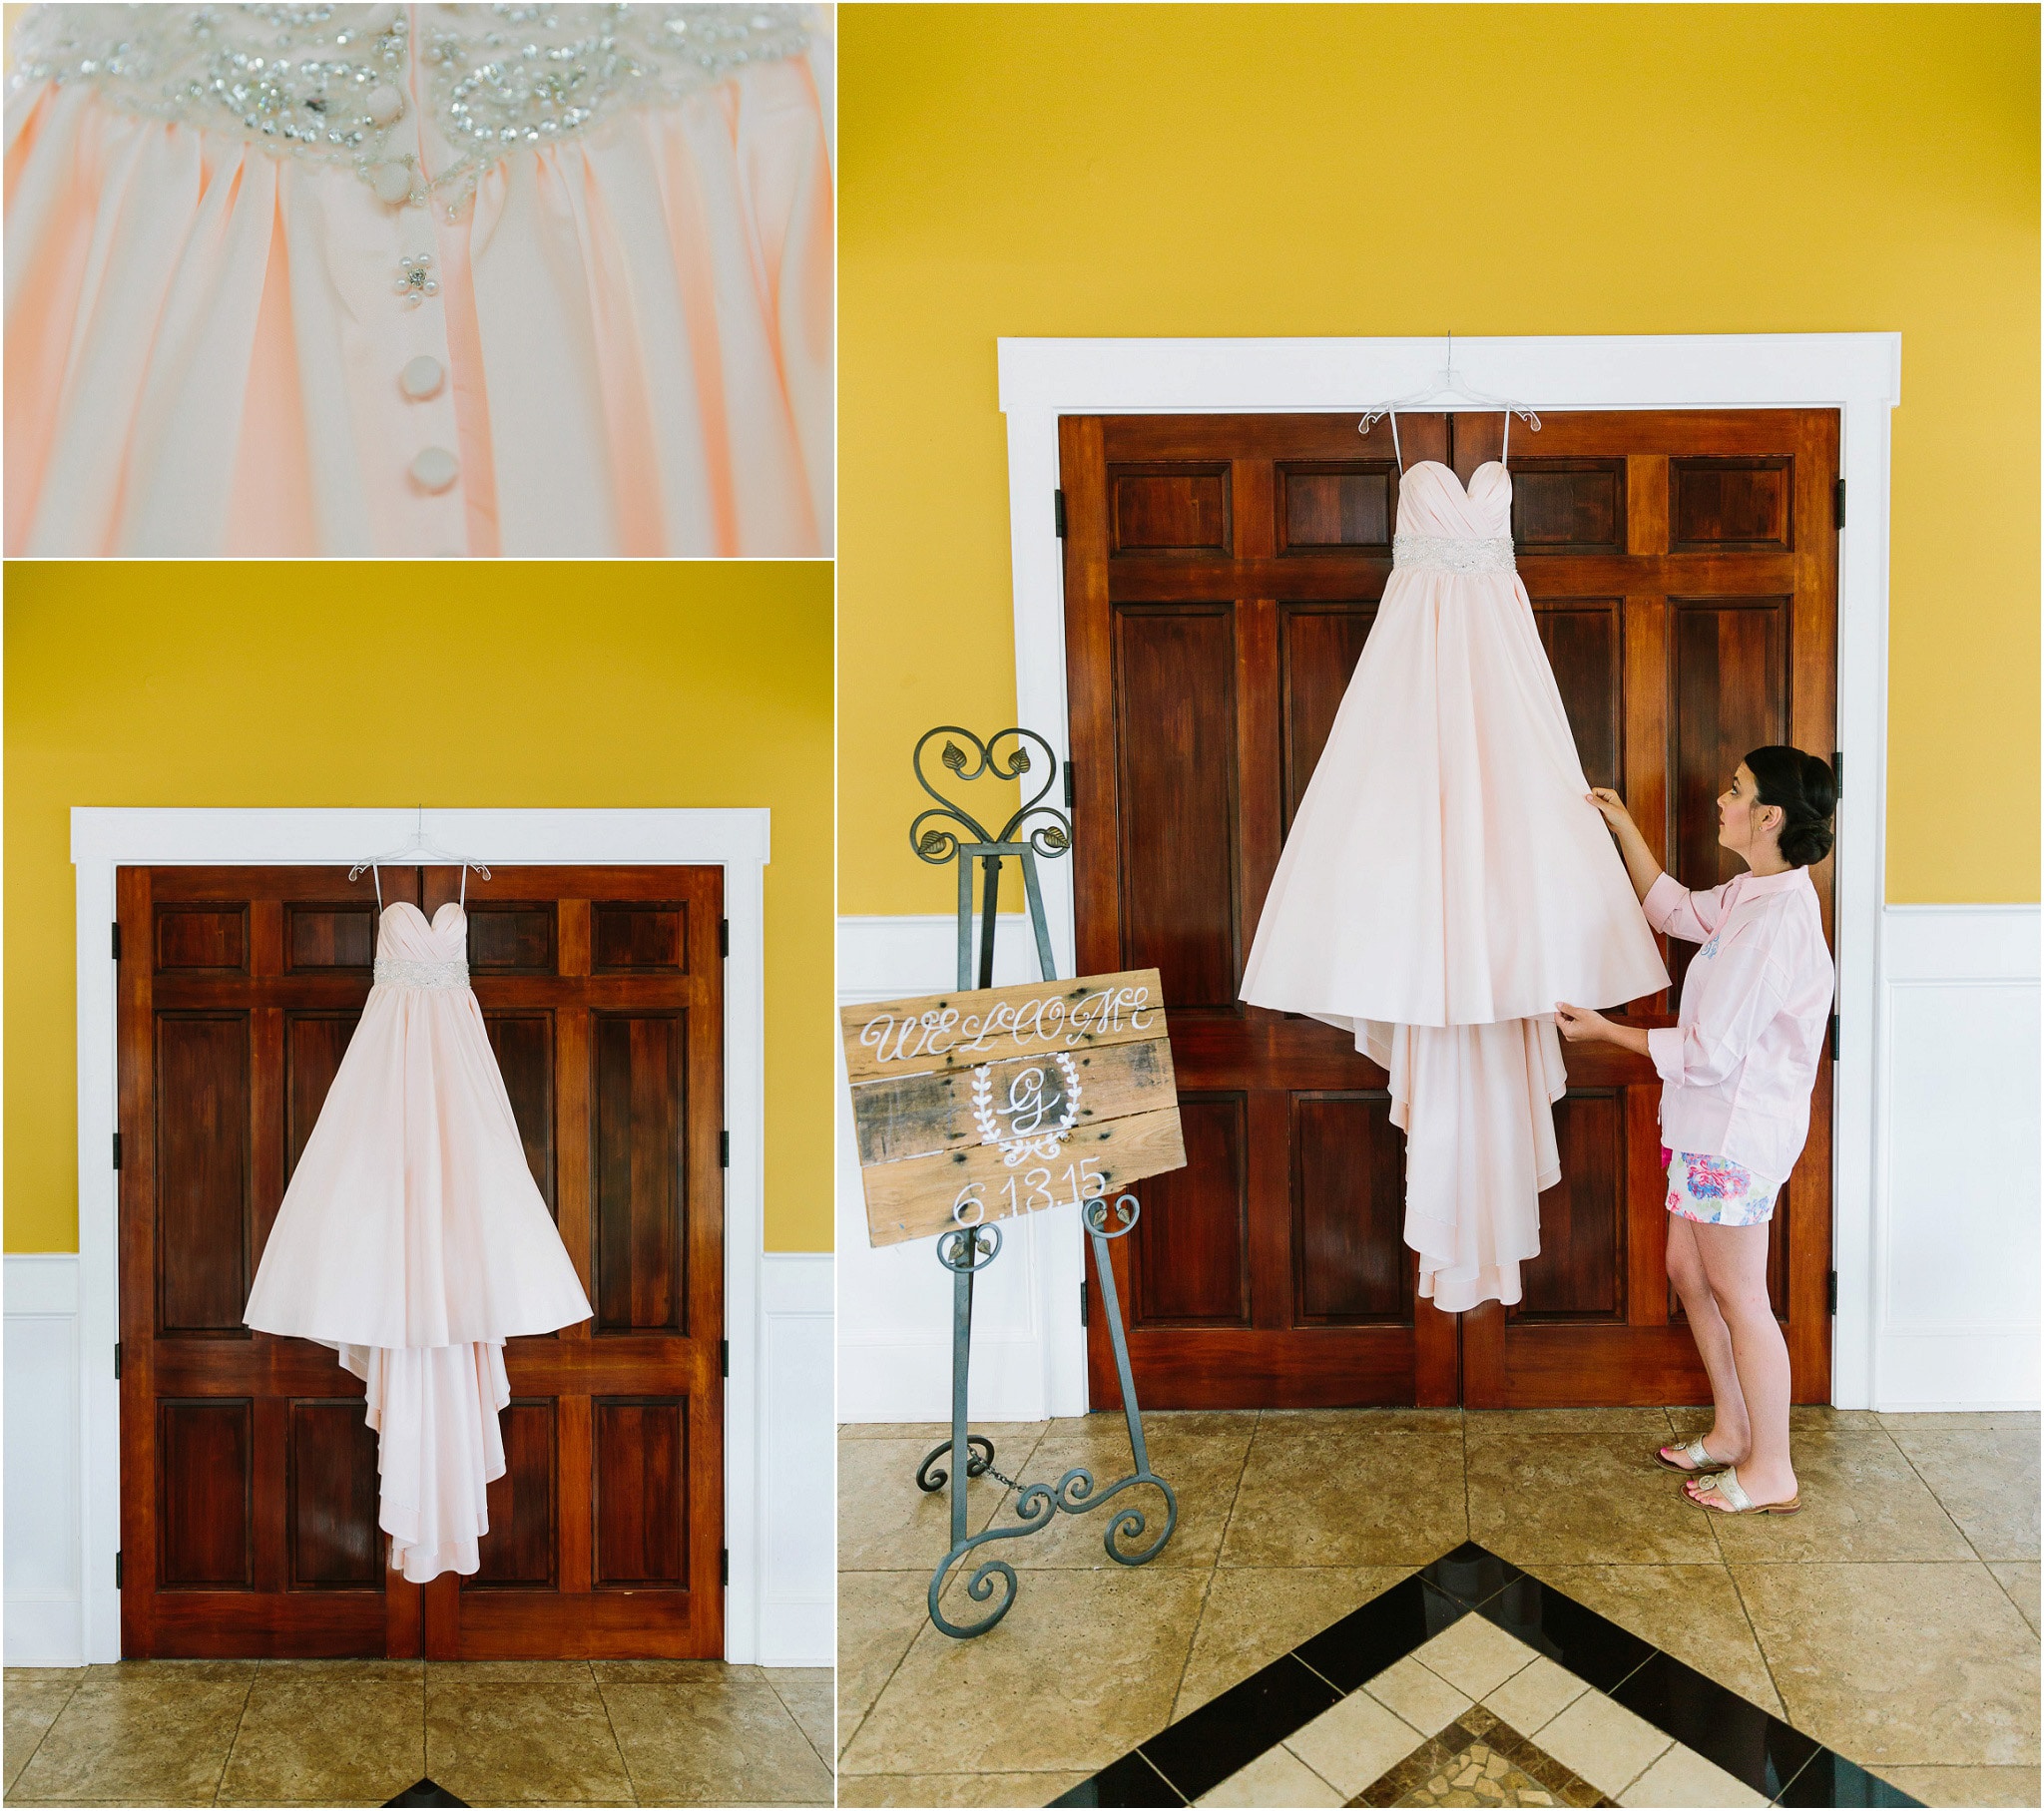 Beautiful pink wedding dress hung against a sturdy wooden double door